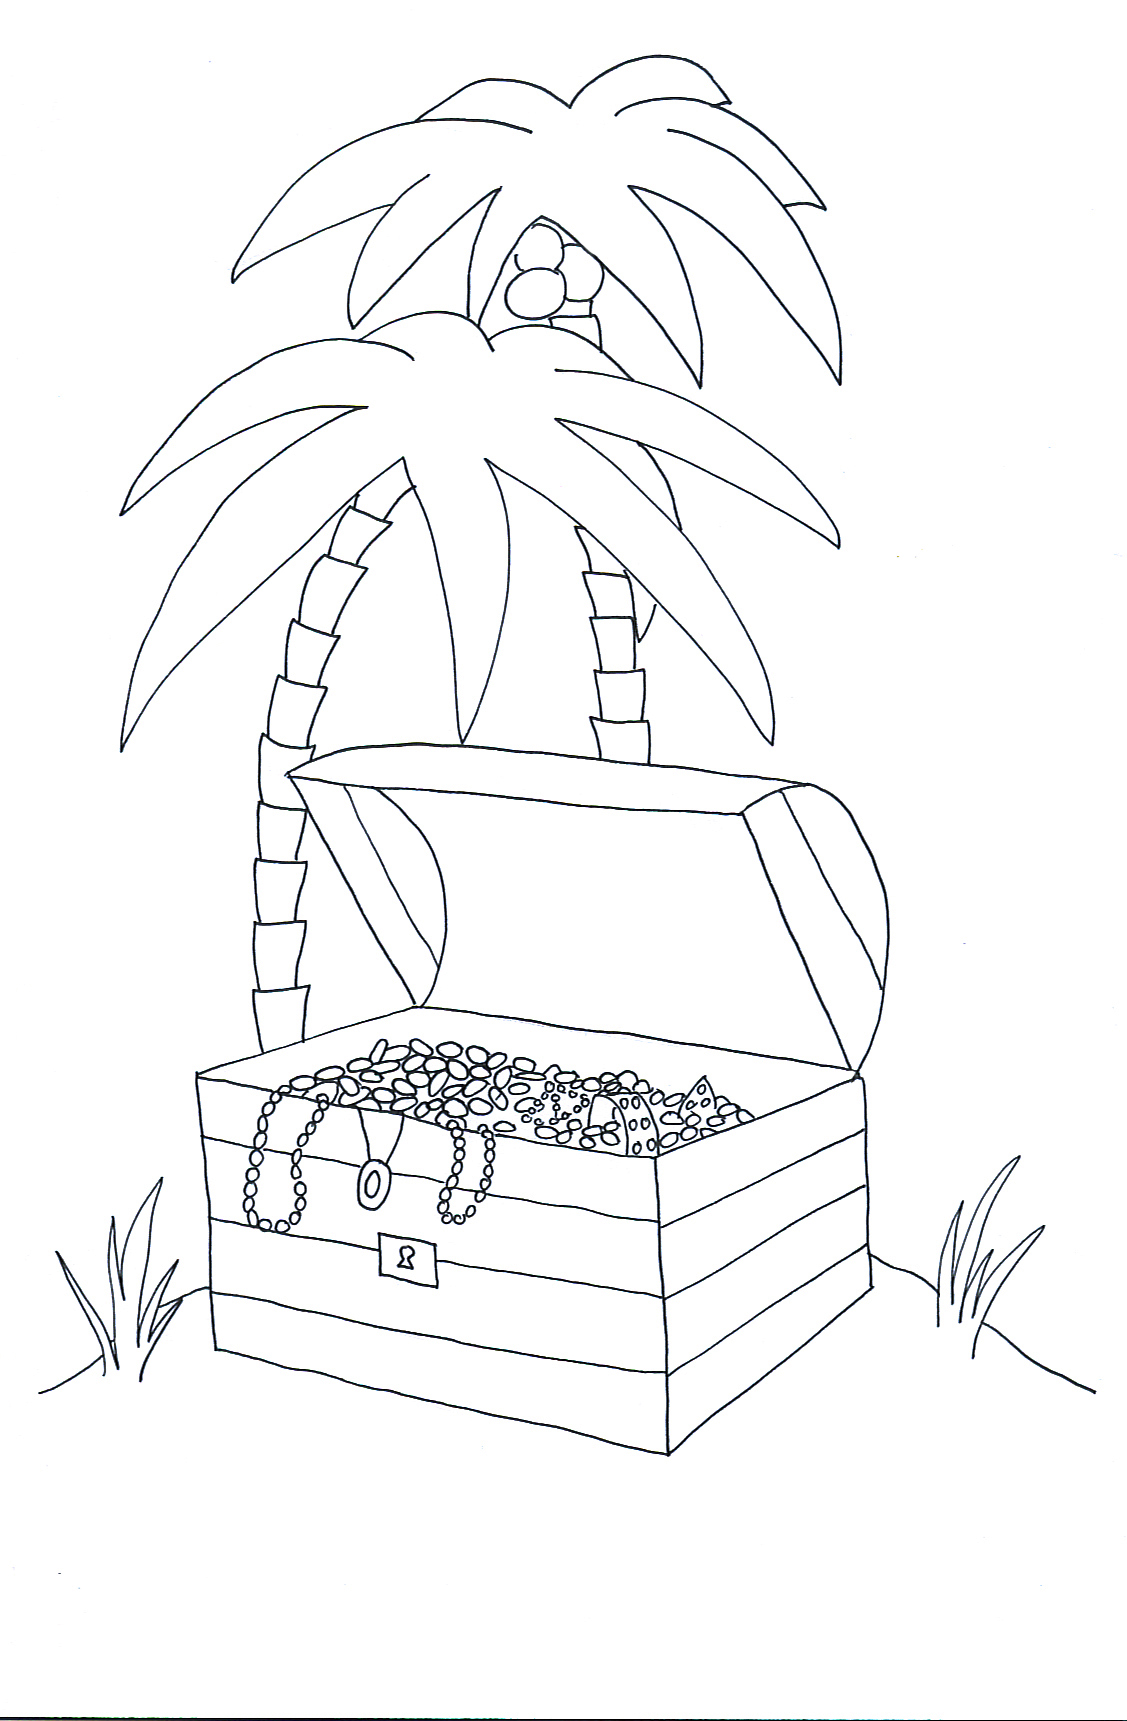 pirate treasure chest on island with palm trees